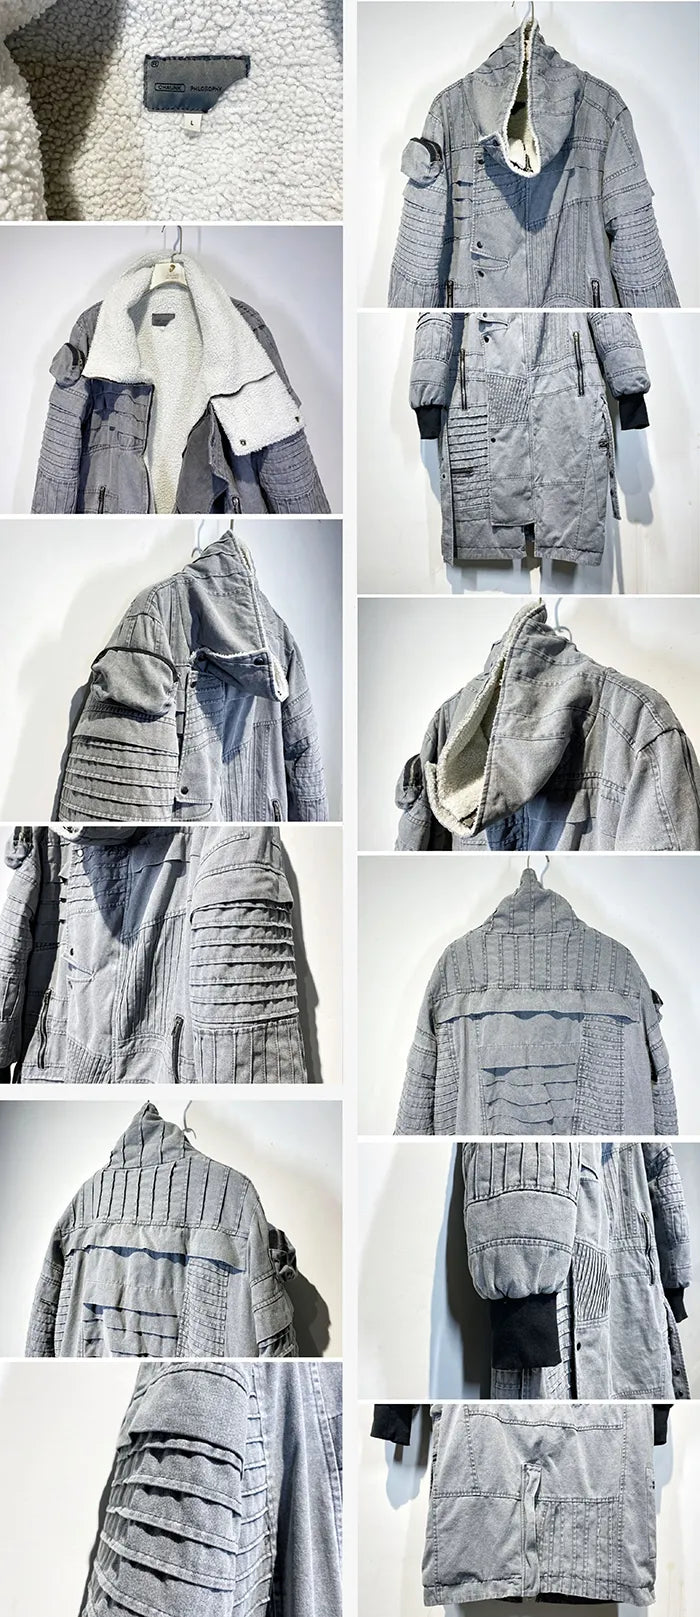 parts of the Wasteland Trench Coat "Oga"